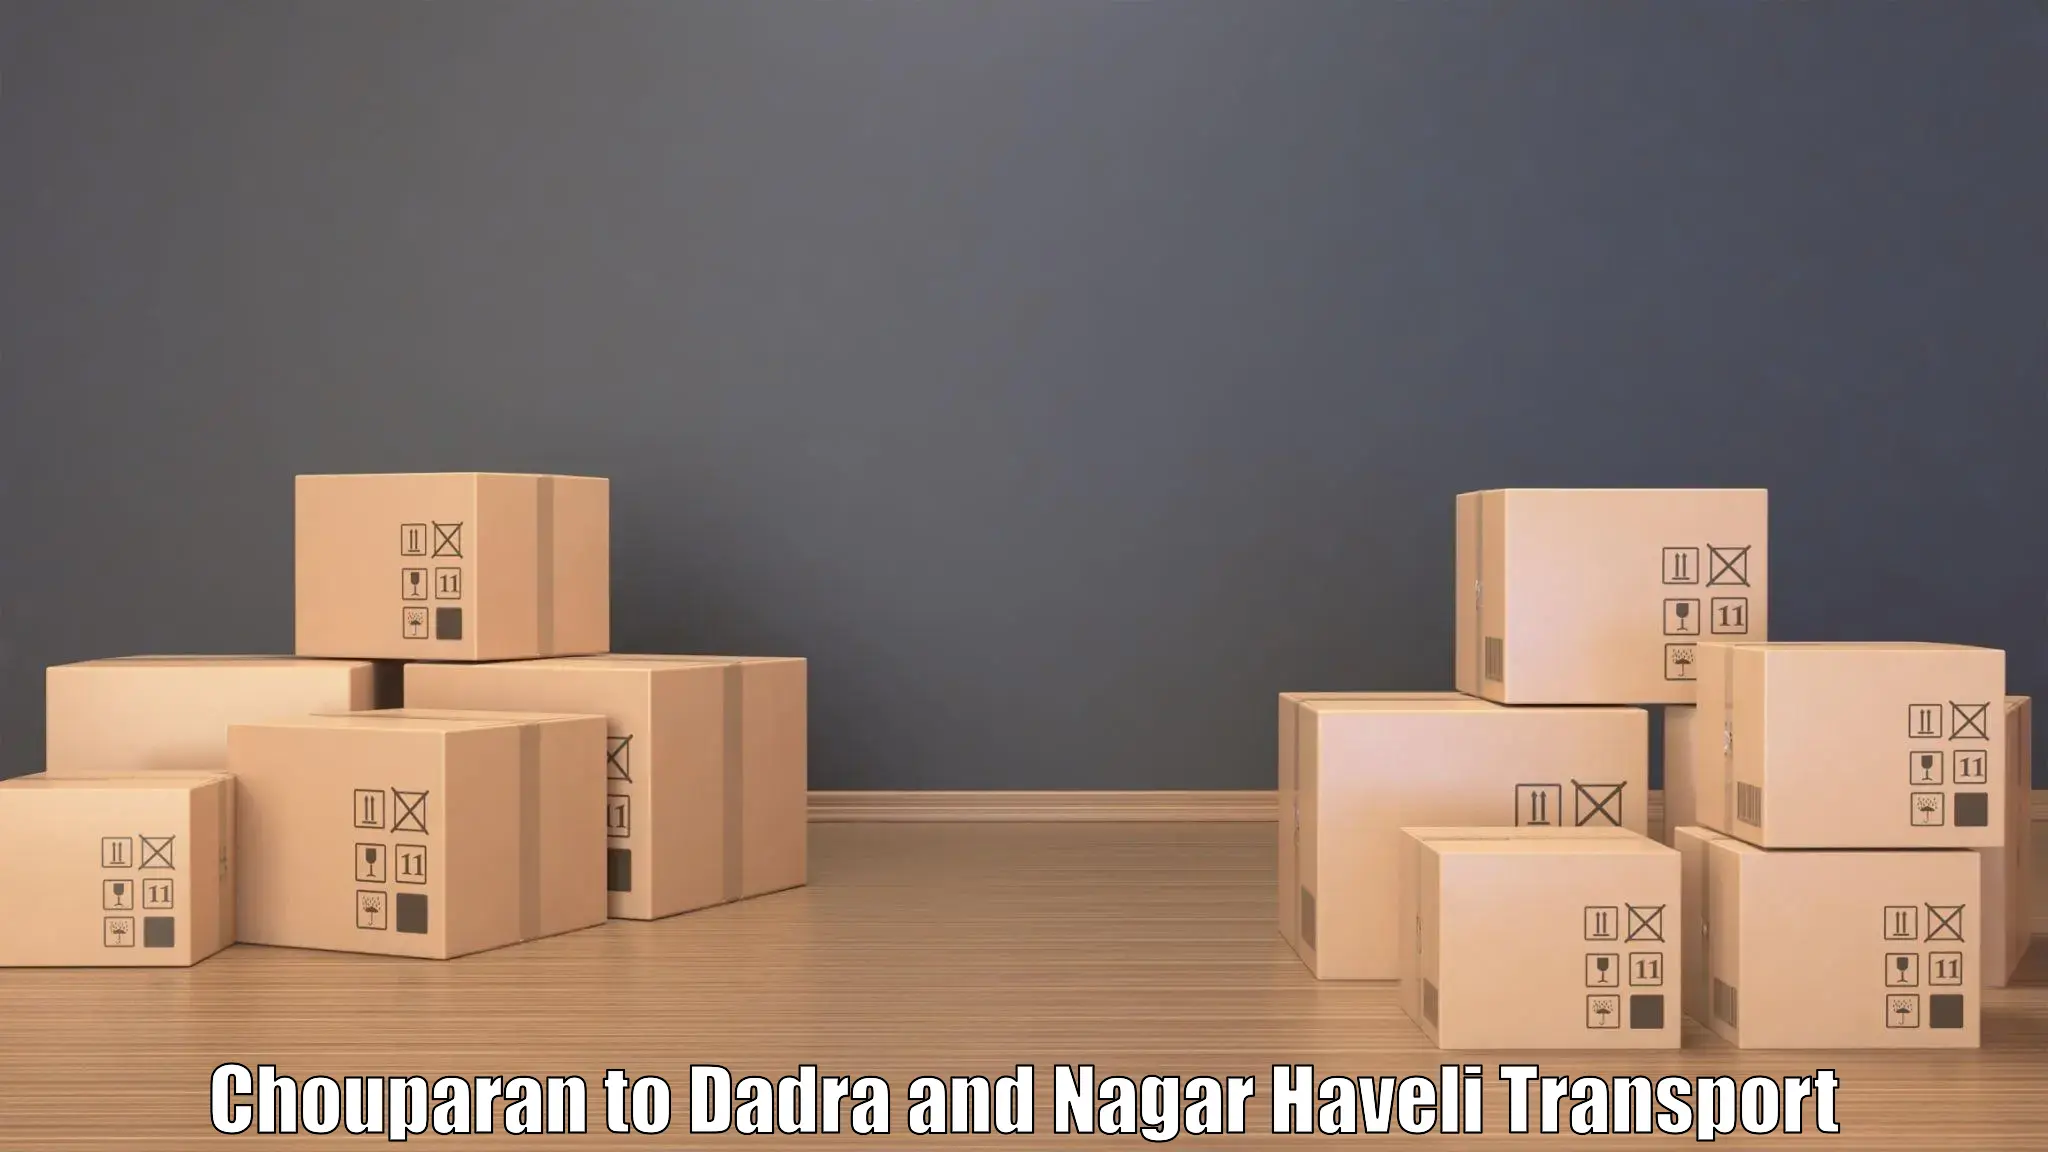 Road transport services in Chouparan to Dadra and Nagar Haveli